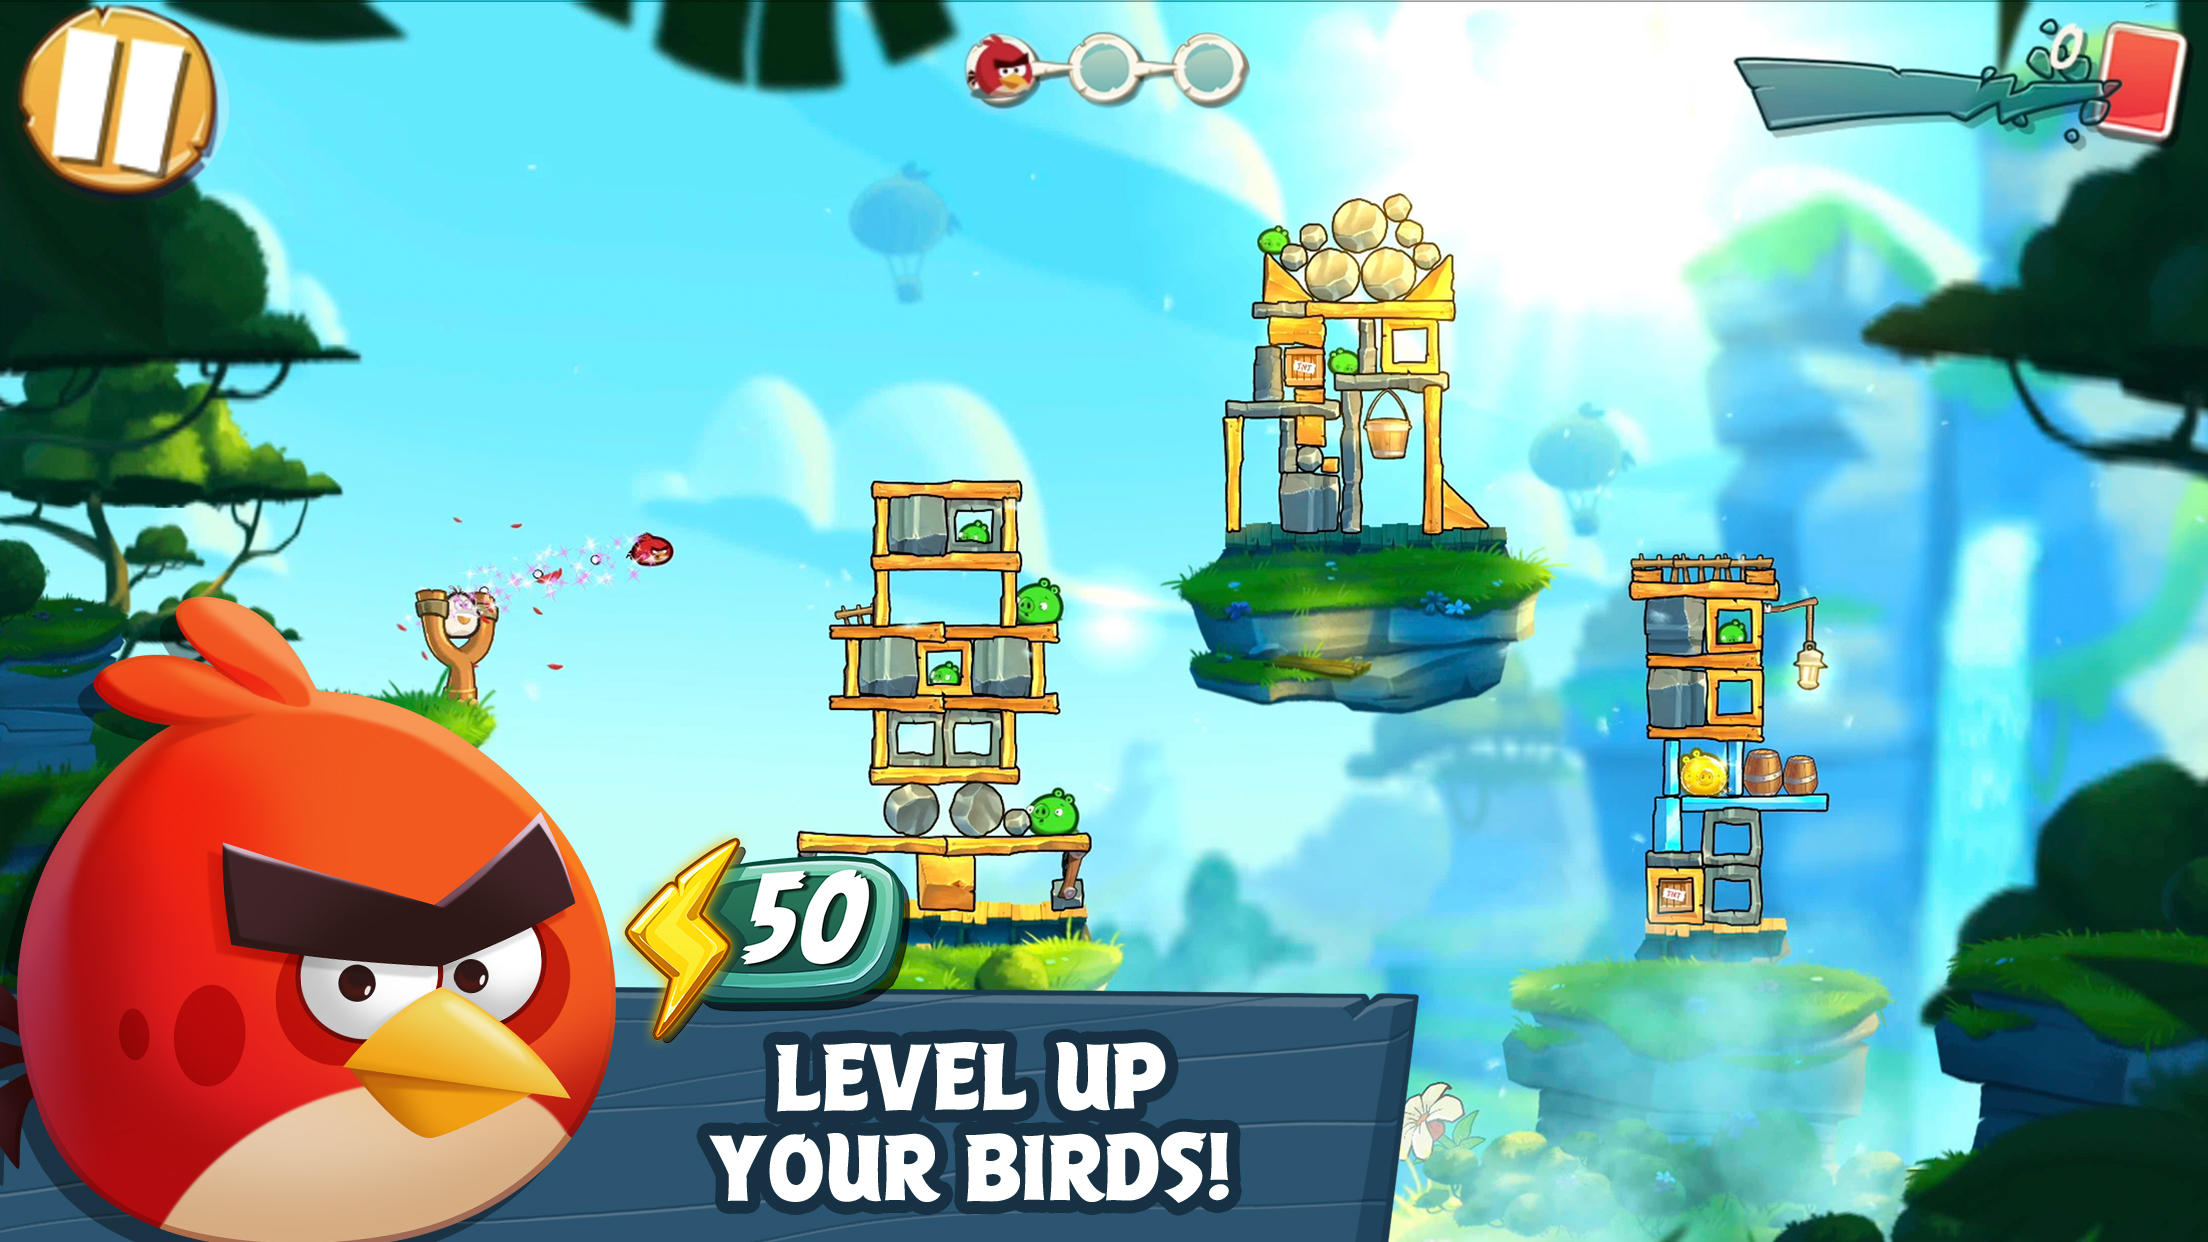 BEFORE you DOWNLOAD Angry Birds Kingdom - Angry Birds Kingdom - TapTap